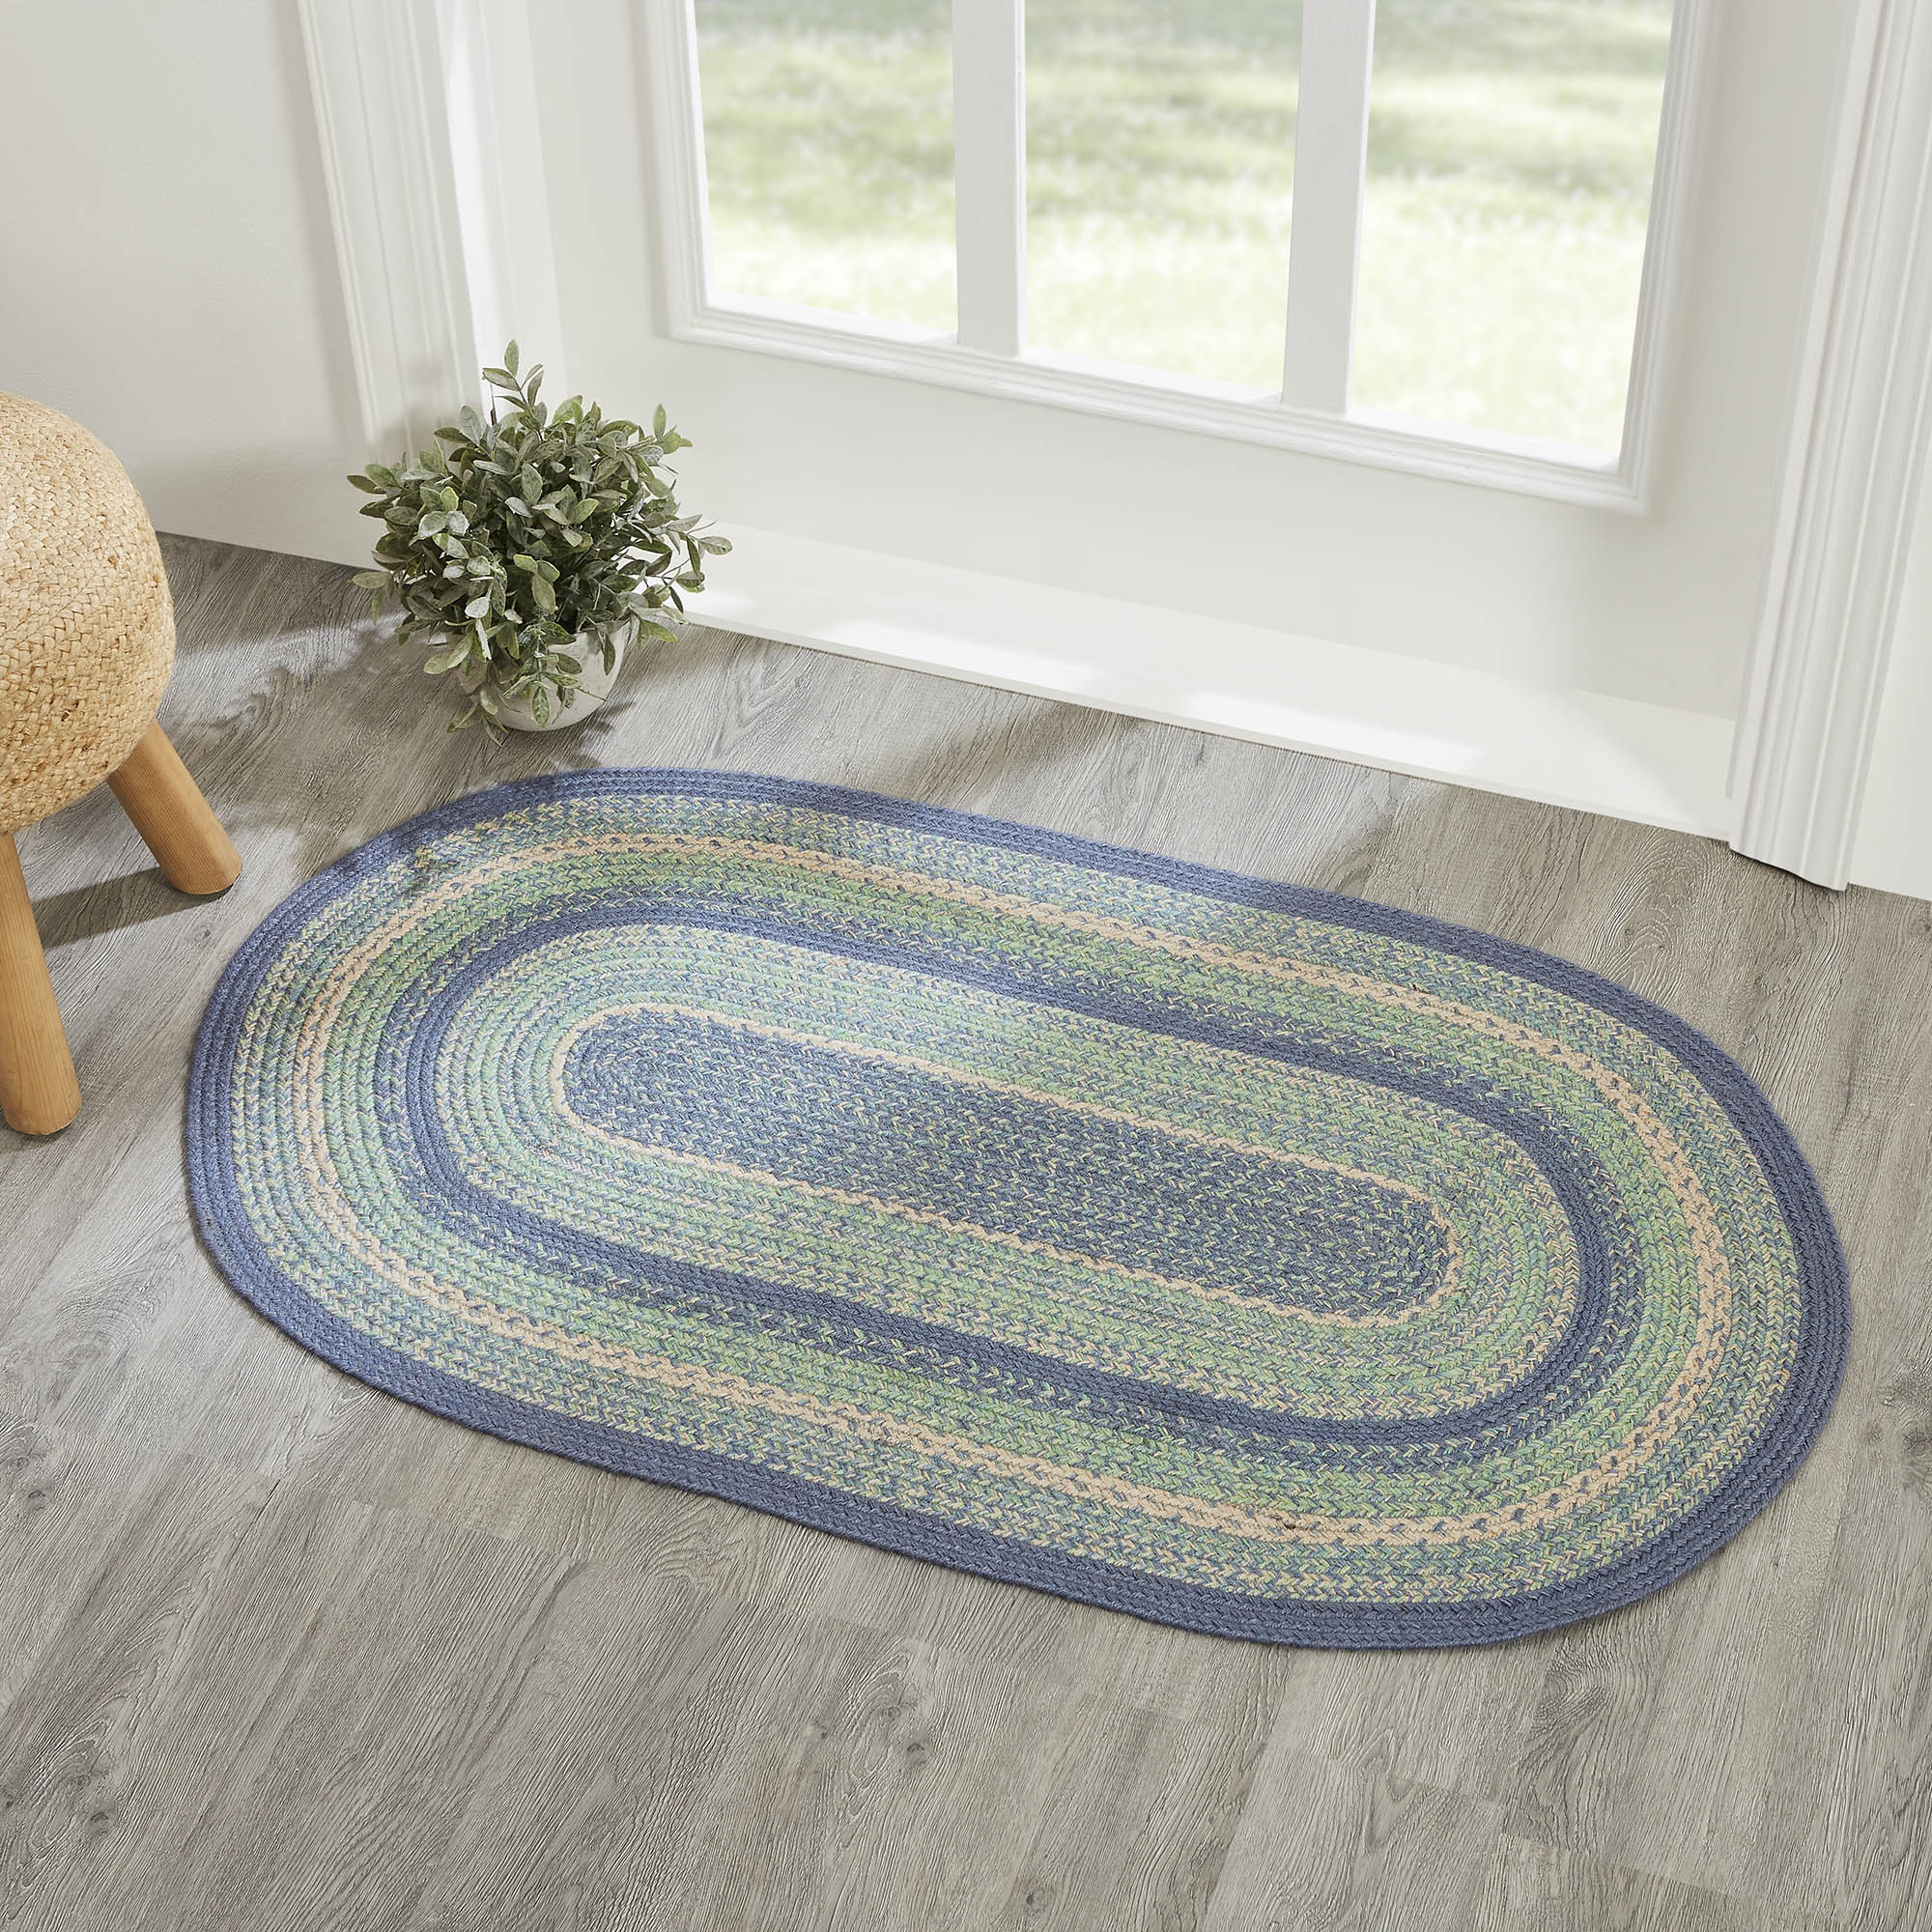 VHC Brands Braided Rug - Kaila Jute Rug Oval with Pad 27x48